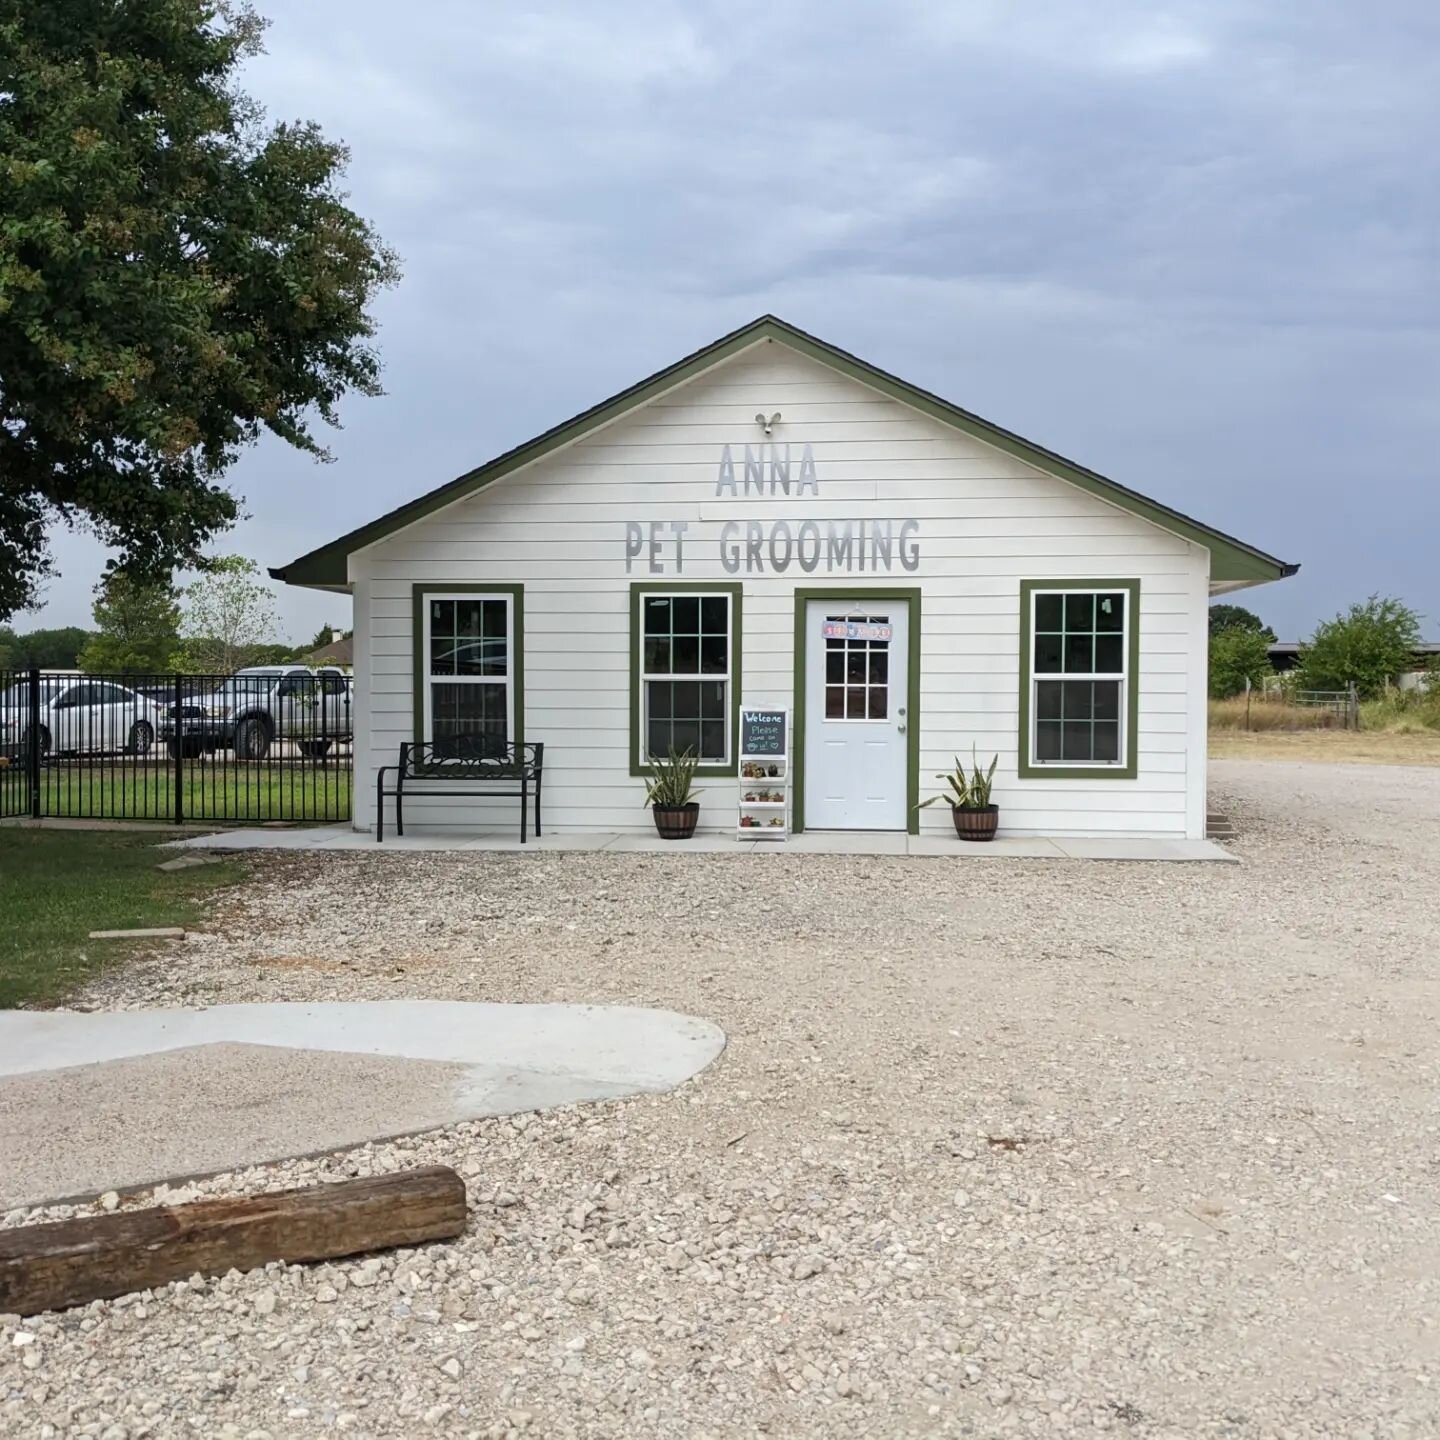 We're a little behind with this announcement, but Anna Veterinary Clinic now has Anna Pet Grooming as our neighbor! Come check out this wonderful addition to our veterinary community in Anna! We think they're pretty great and amazing at what they do!